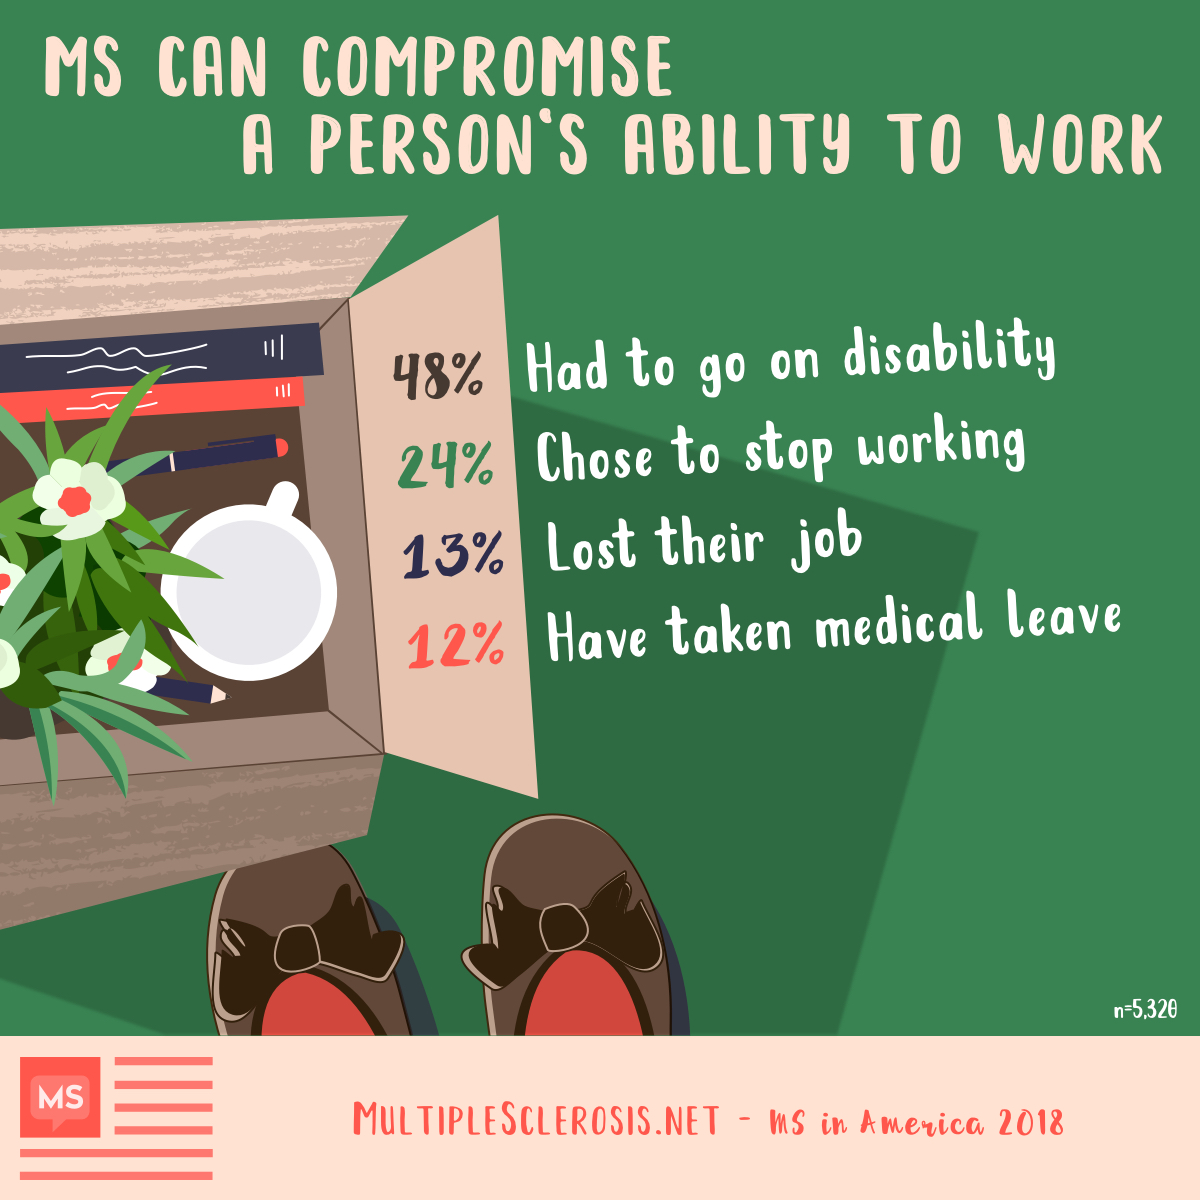 MS can compromise a person's ability to work. 48% had to go on disability, 24% chose to stop working, 13% lost their job at some point, 12% have taken a medical leave from work at some point